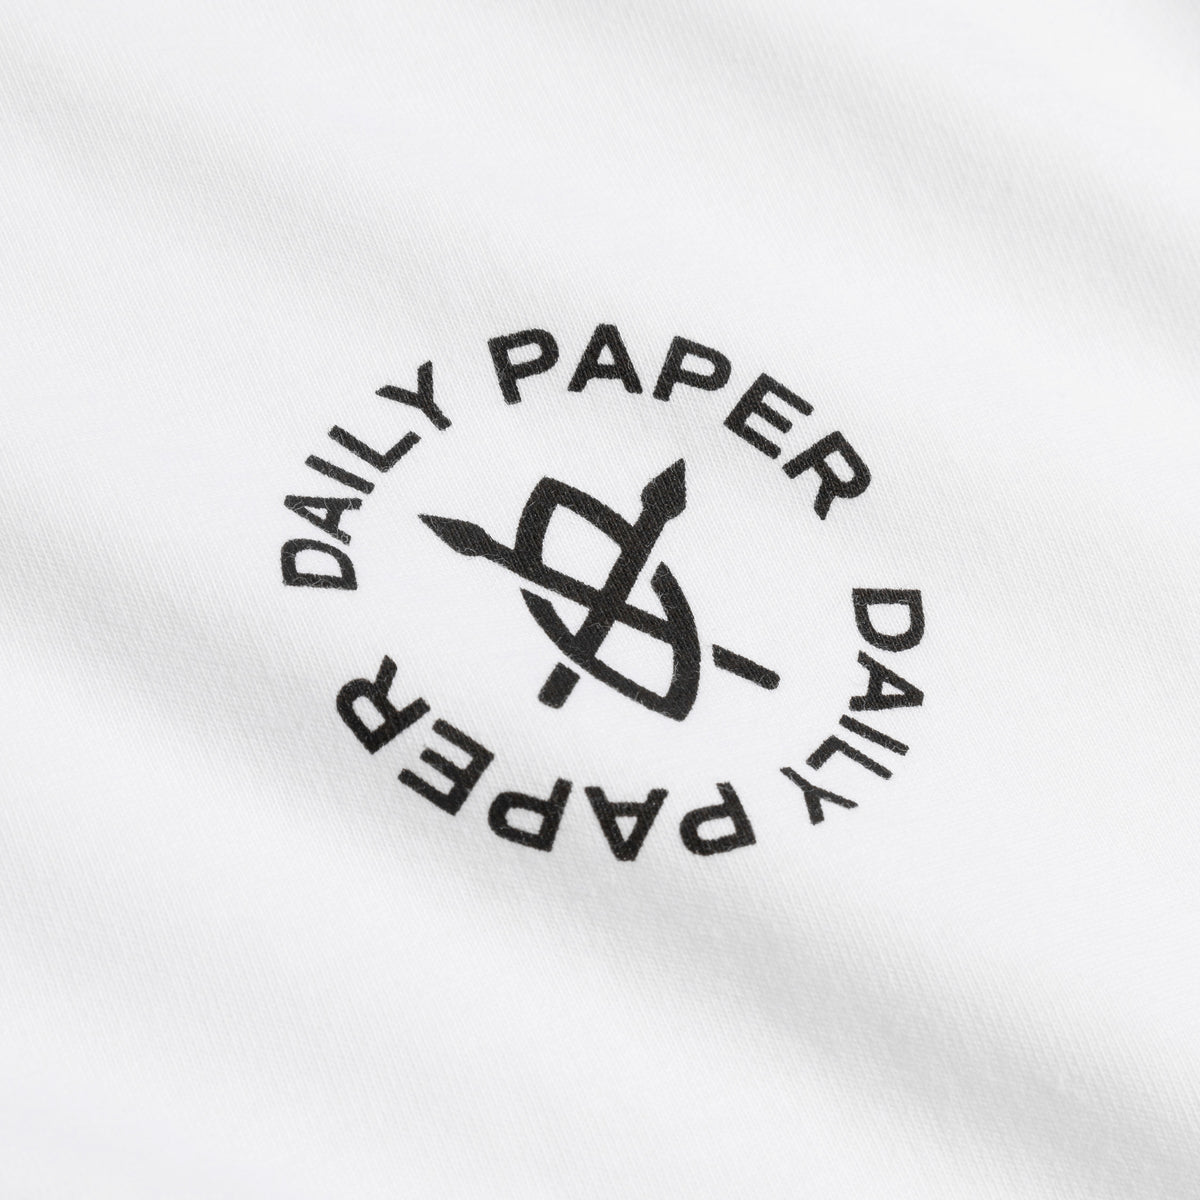 daily paper logo